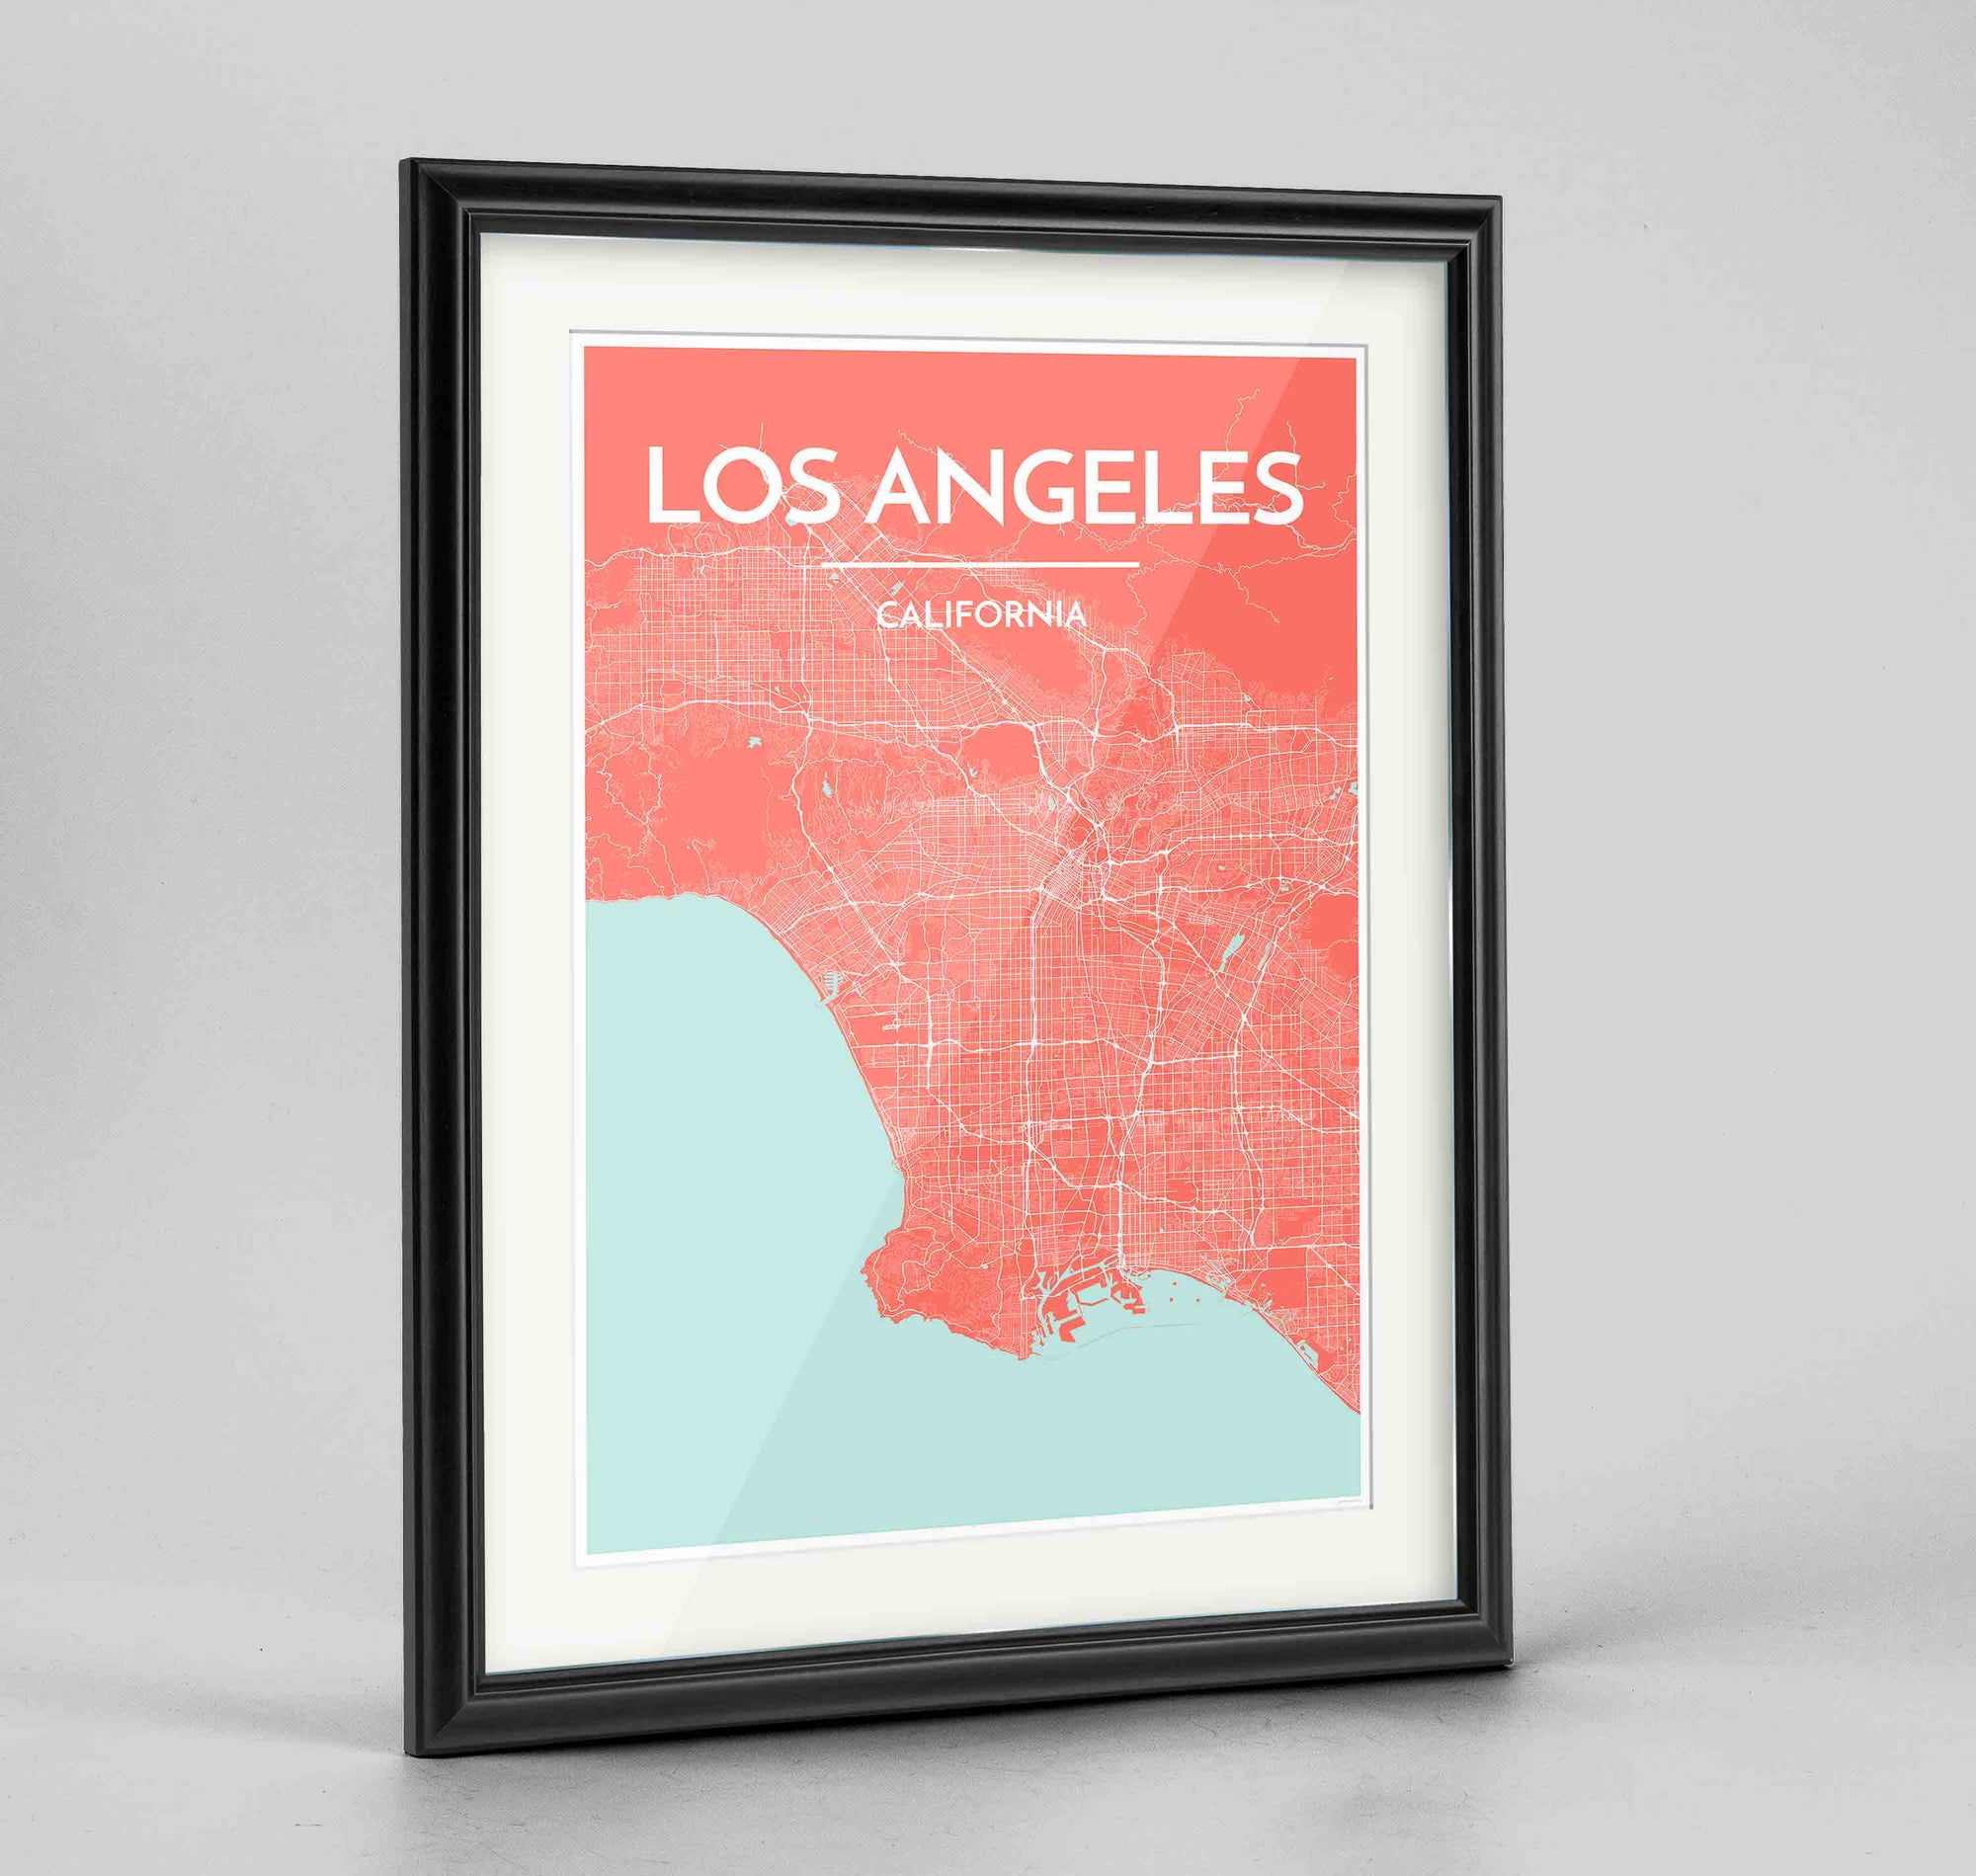 Framed Los Angeles Map Art Print 24x36" Traditional Black frame Point Two Design Group